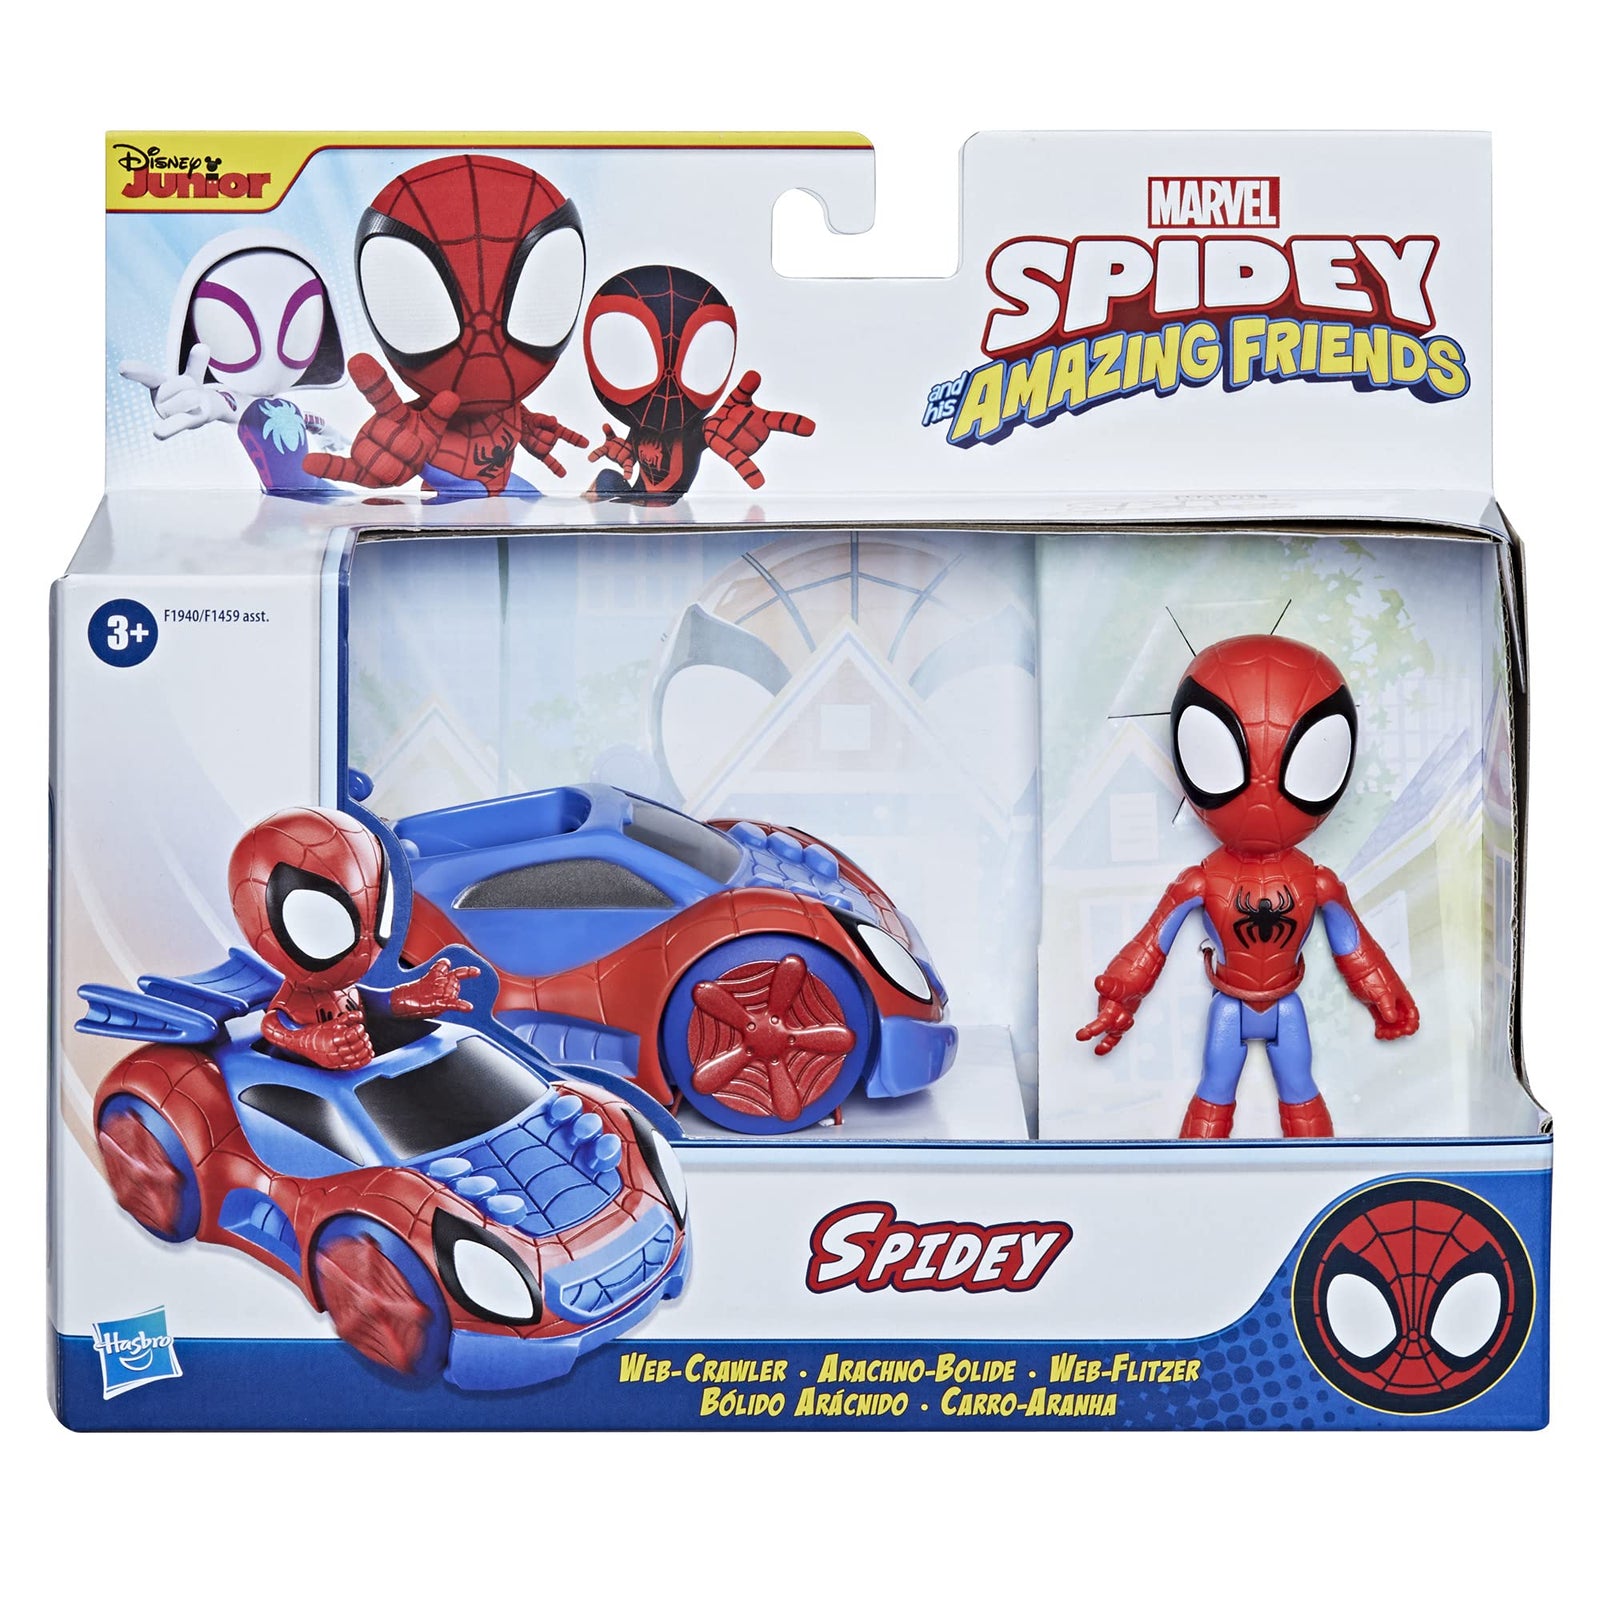 Marvel Spidey and His Amazing Friends Spidey Action Figure and Web-Crawler Vehicle, for Kids Ages 3 and Up